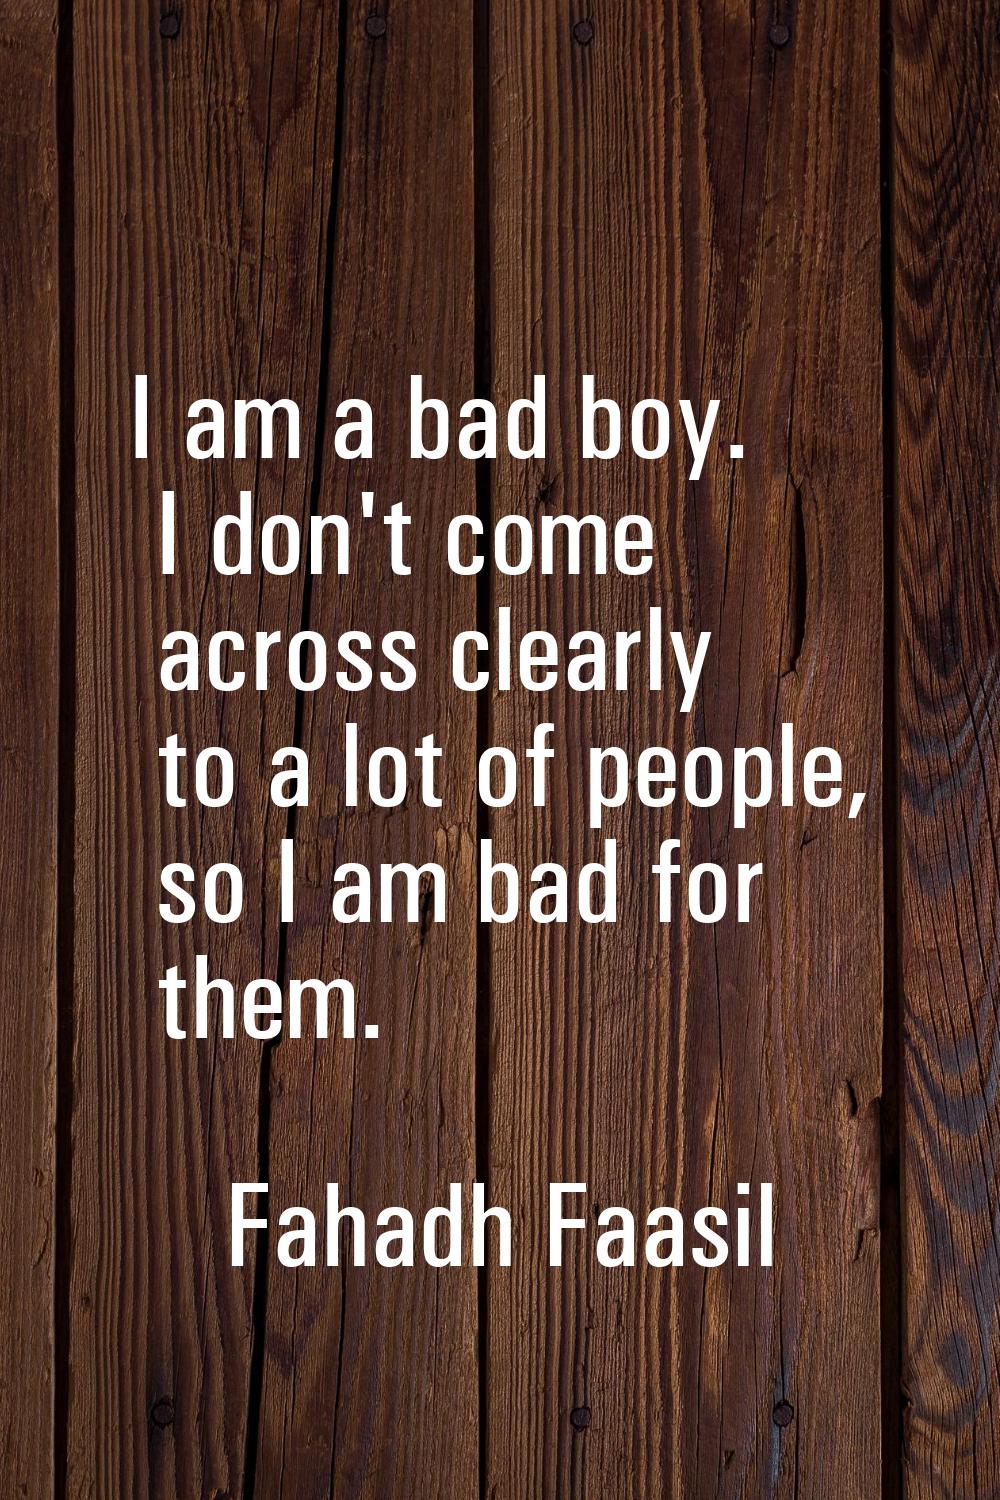 I am a bad boy. I don't come across clearly to a lot of people, so I am bad for them.